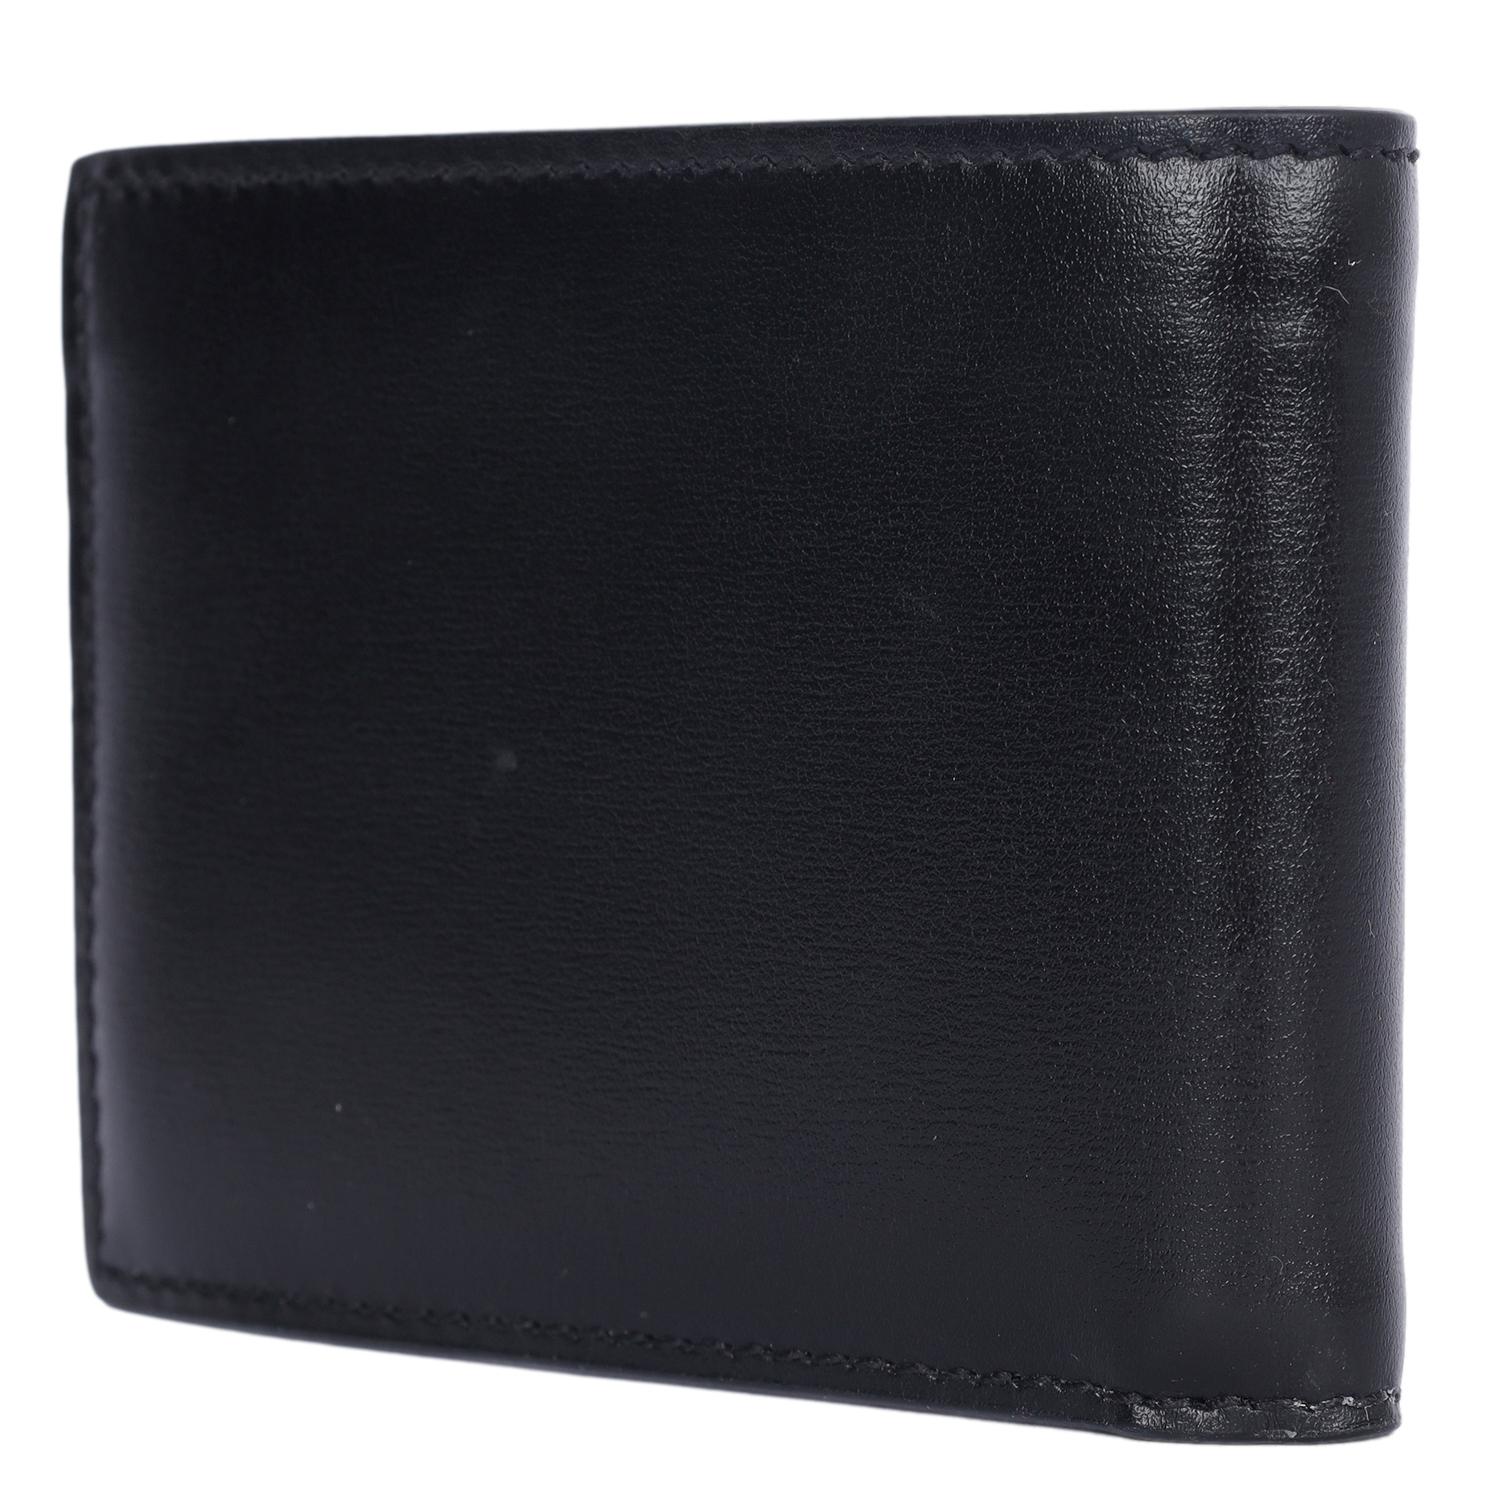 Gucci GG Marmont Black Leather Bi Fold Wallet For Sale 3